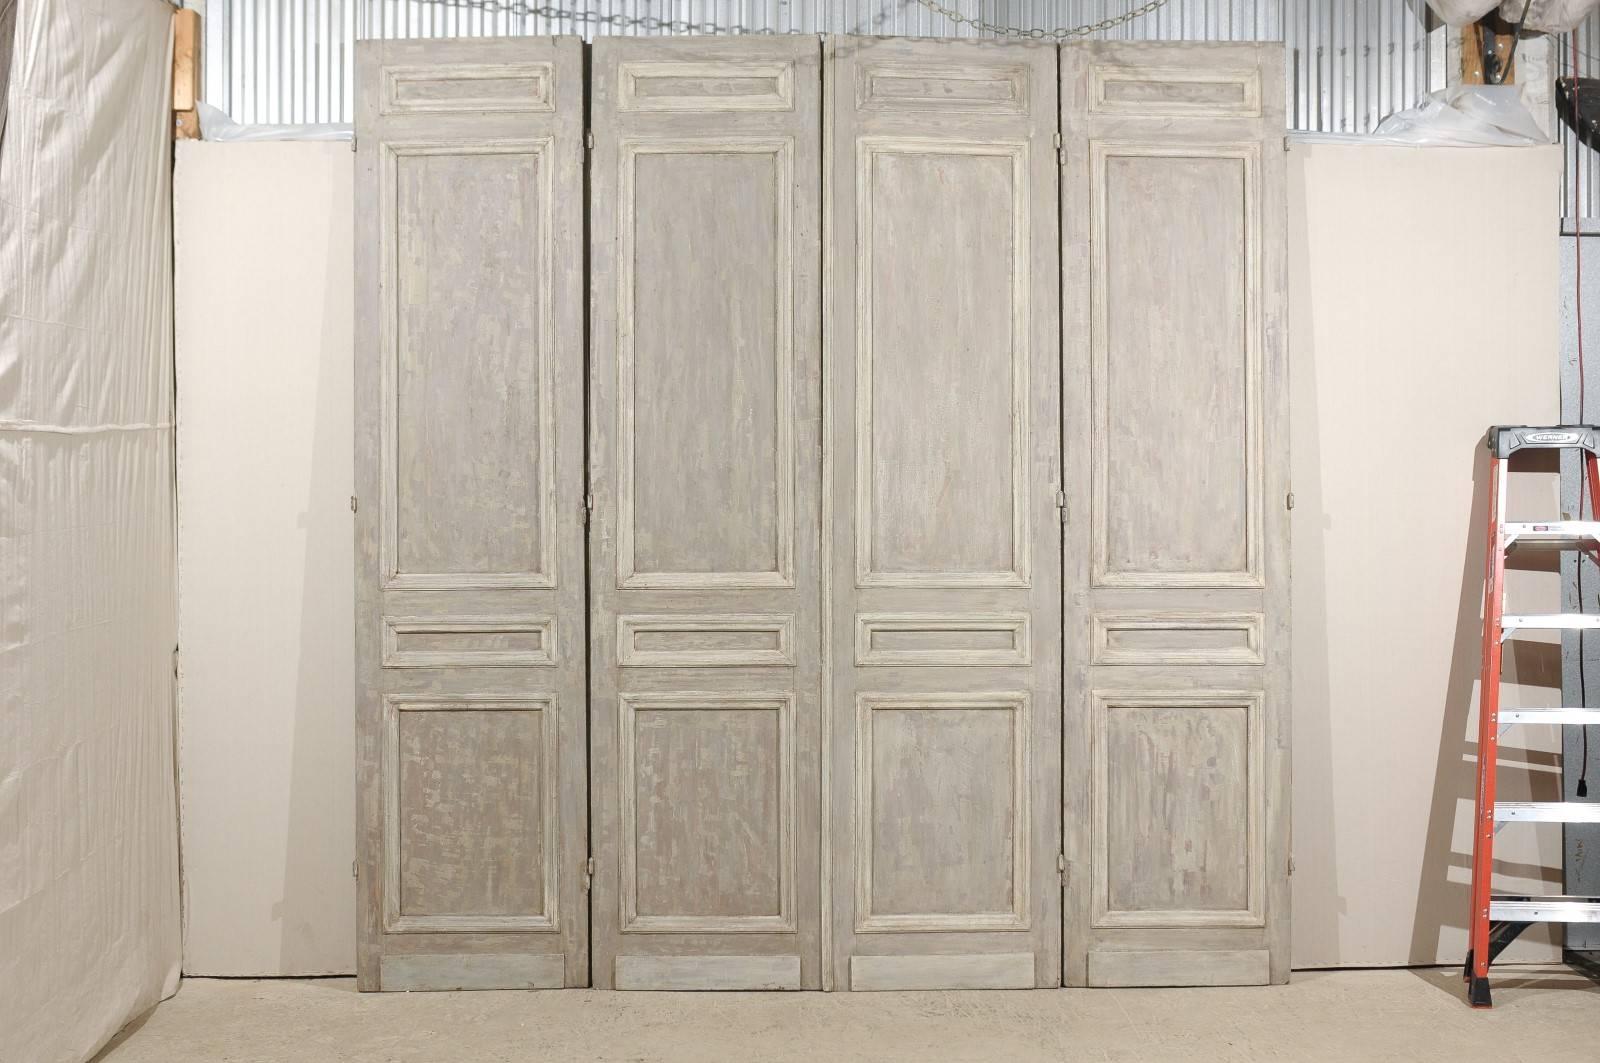 A set of French tall bi-folding doors from the 19th century. These two pairs of French bi-folding 10 feet doors have an overall green grey color tone with hints of blue. The doors are simply decorated with carved moldings of a darker green grey